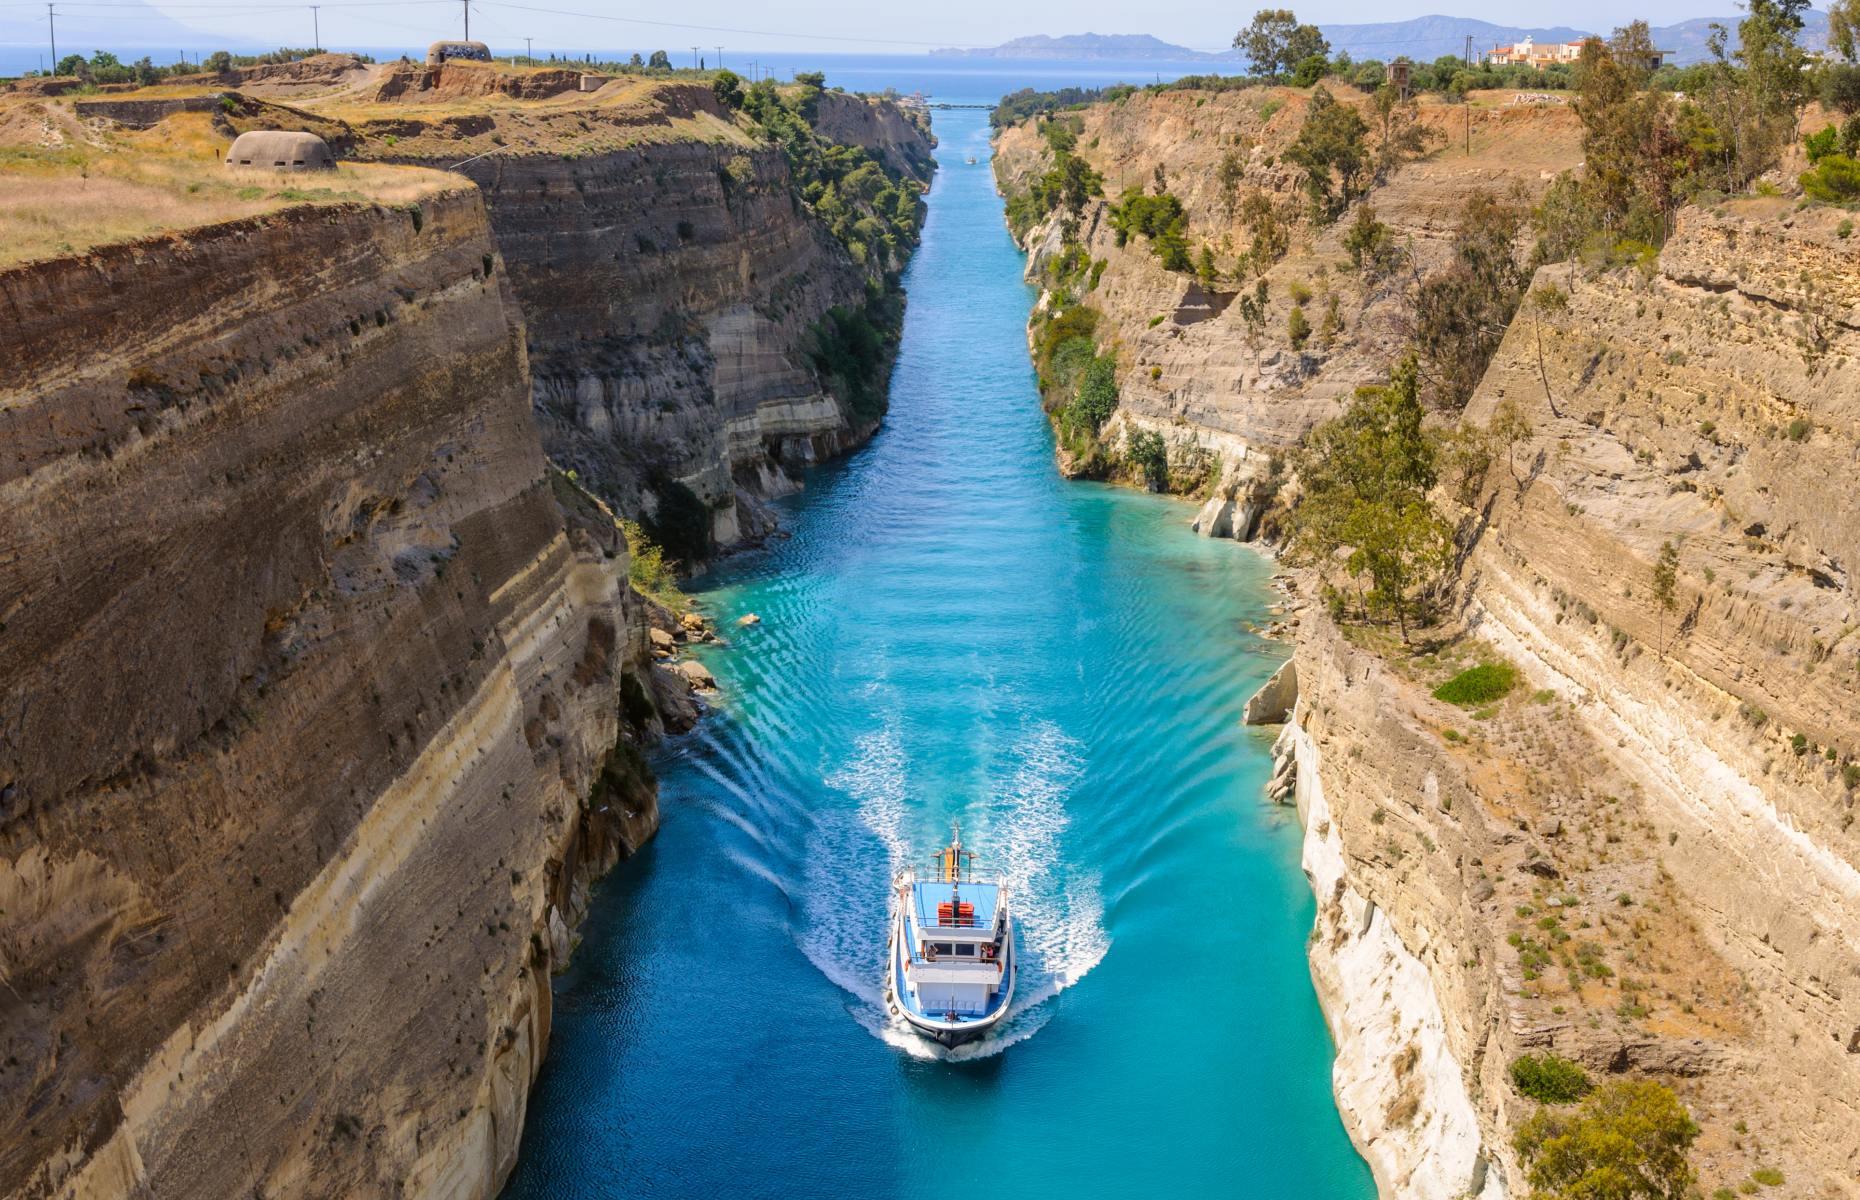 Slicing across the Isthmus of Corinth, this tiny Greek waterway links the Gulf of Corinth in the northwest with the Saronic Gulf in the southeast. Completed in 1893, the canal was built as a shortcut, saving ships around 185 nautical miles (340km) in sailing time. At roughly 3.9 miles (6.3km) with a width reaching up to 82 feet (25m), it is one of the smallest waterways in the world. Fringed by steep cliffs, its impressive narrow design has made it a popular tourist destination.